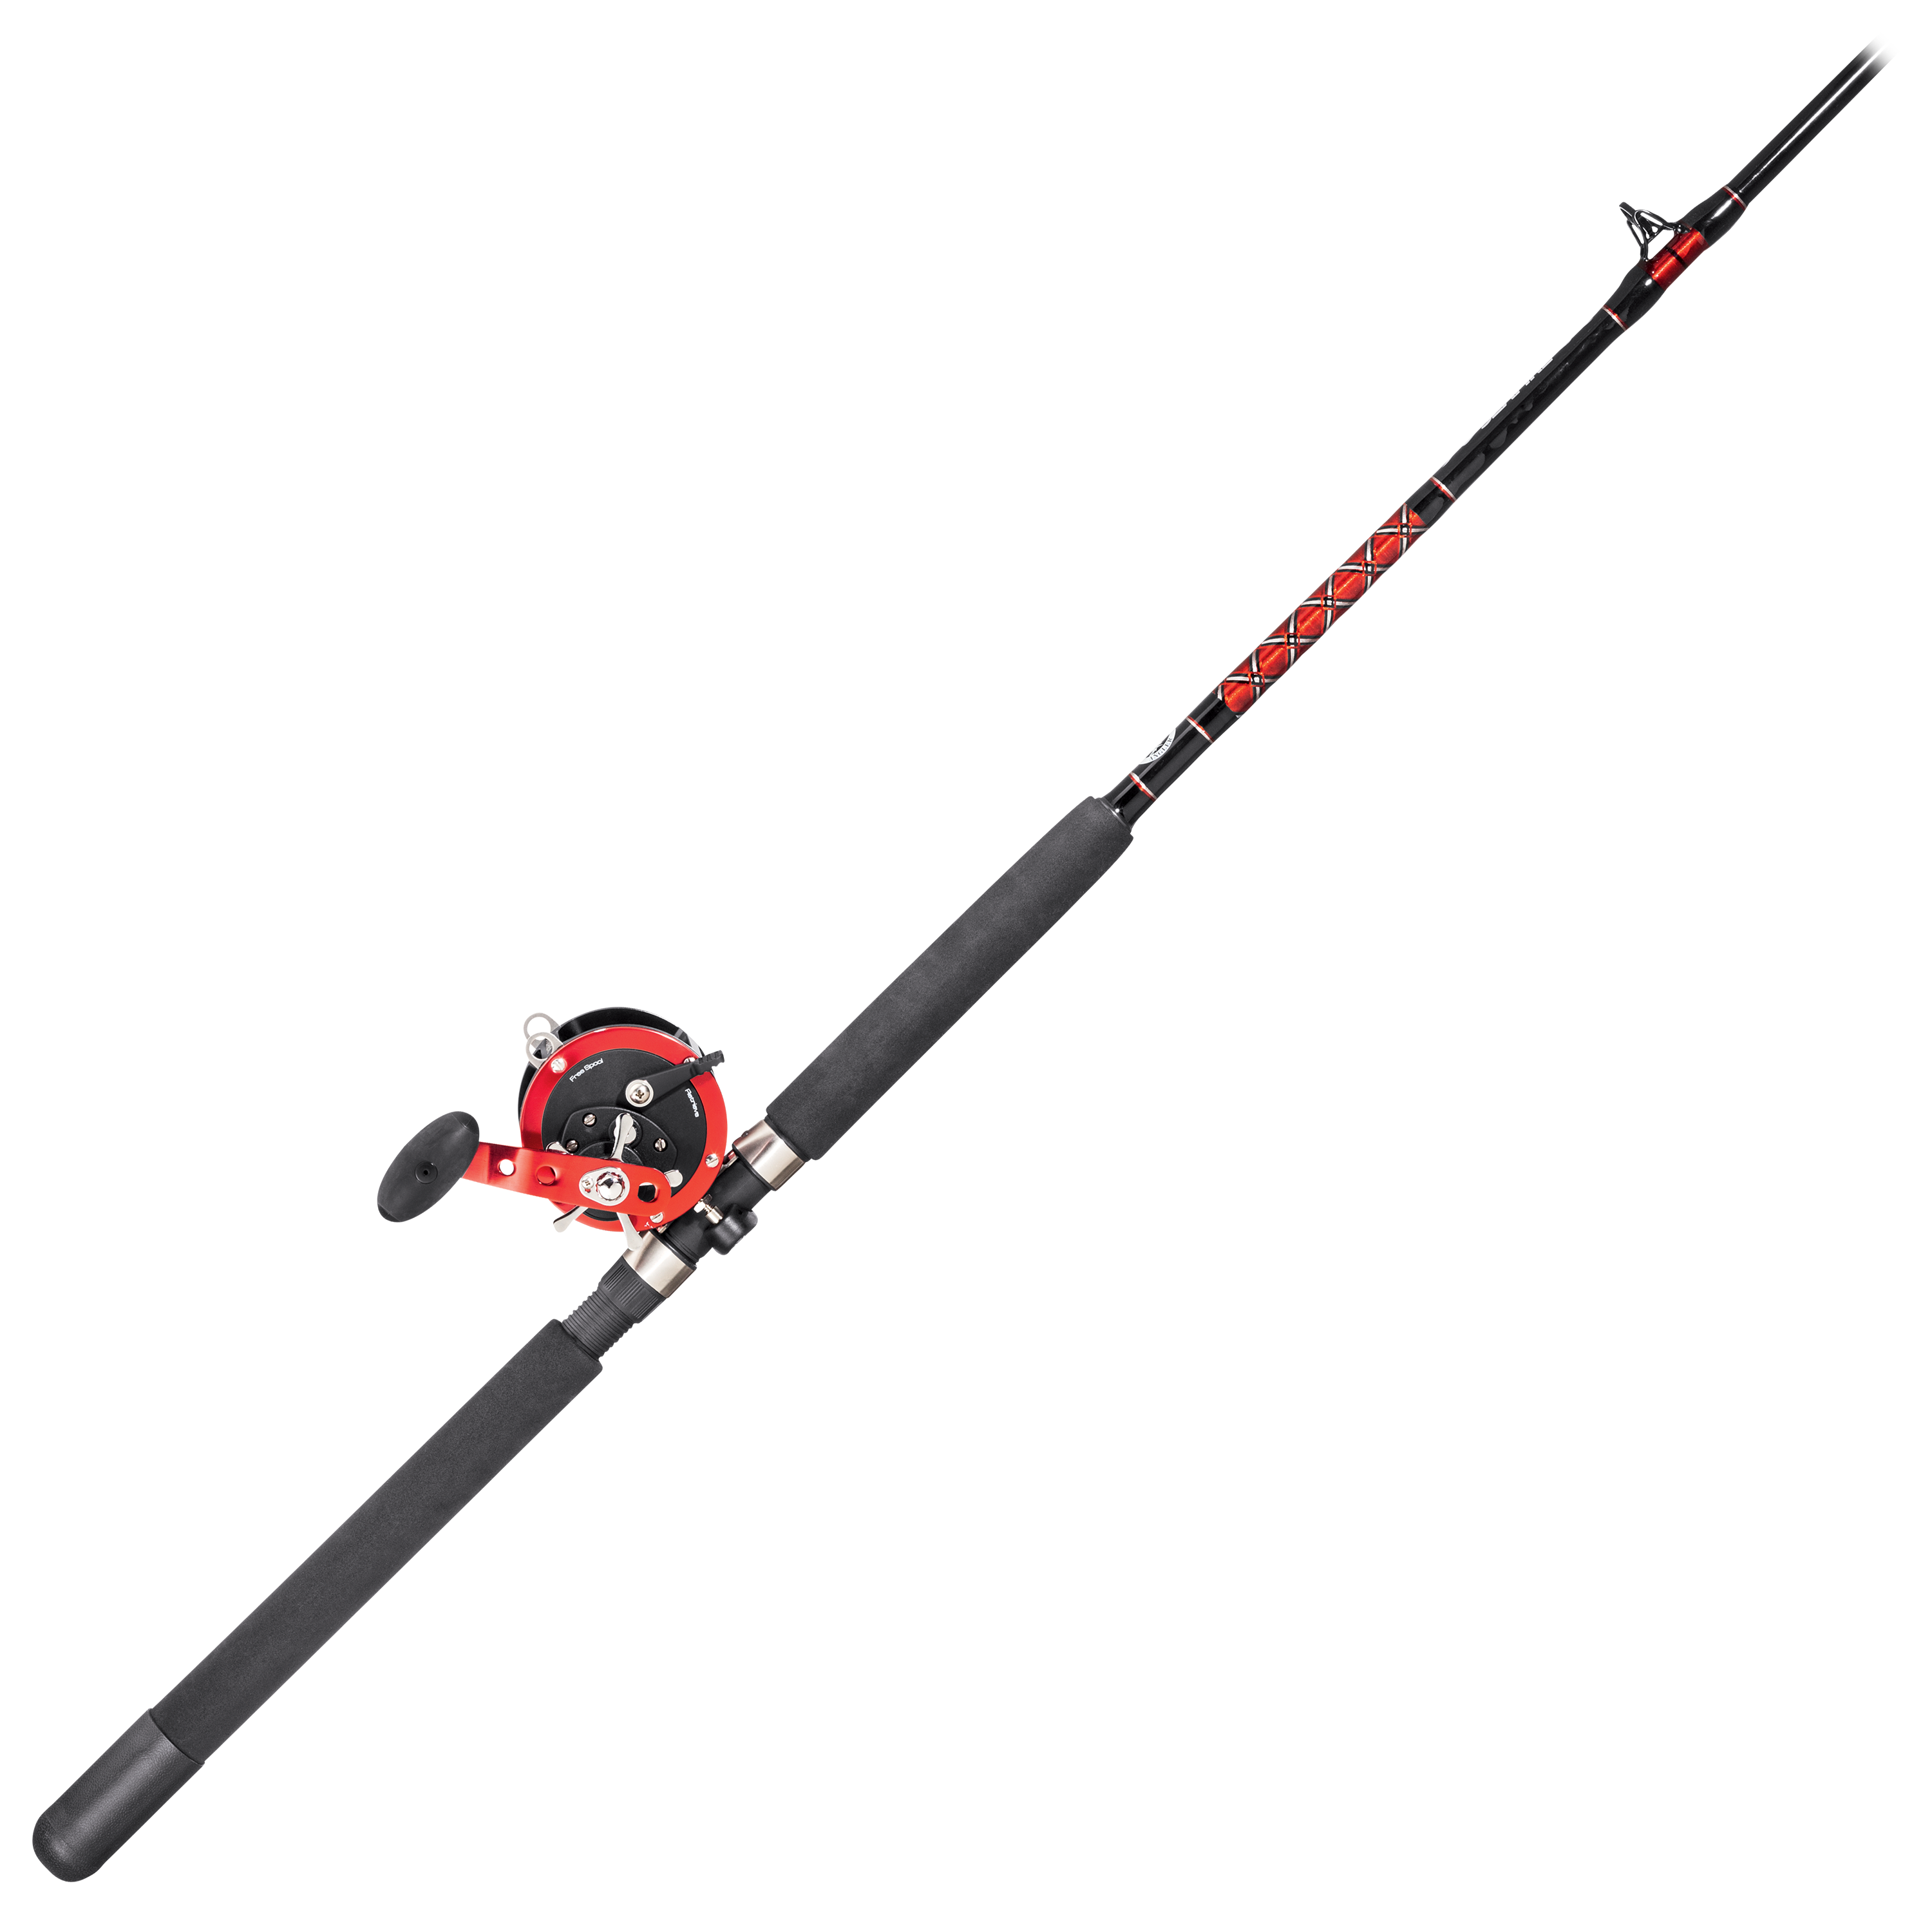 Offshore Angler SeaFire Conventional Rod and Reel Combo